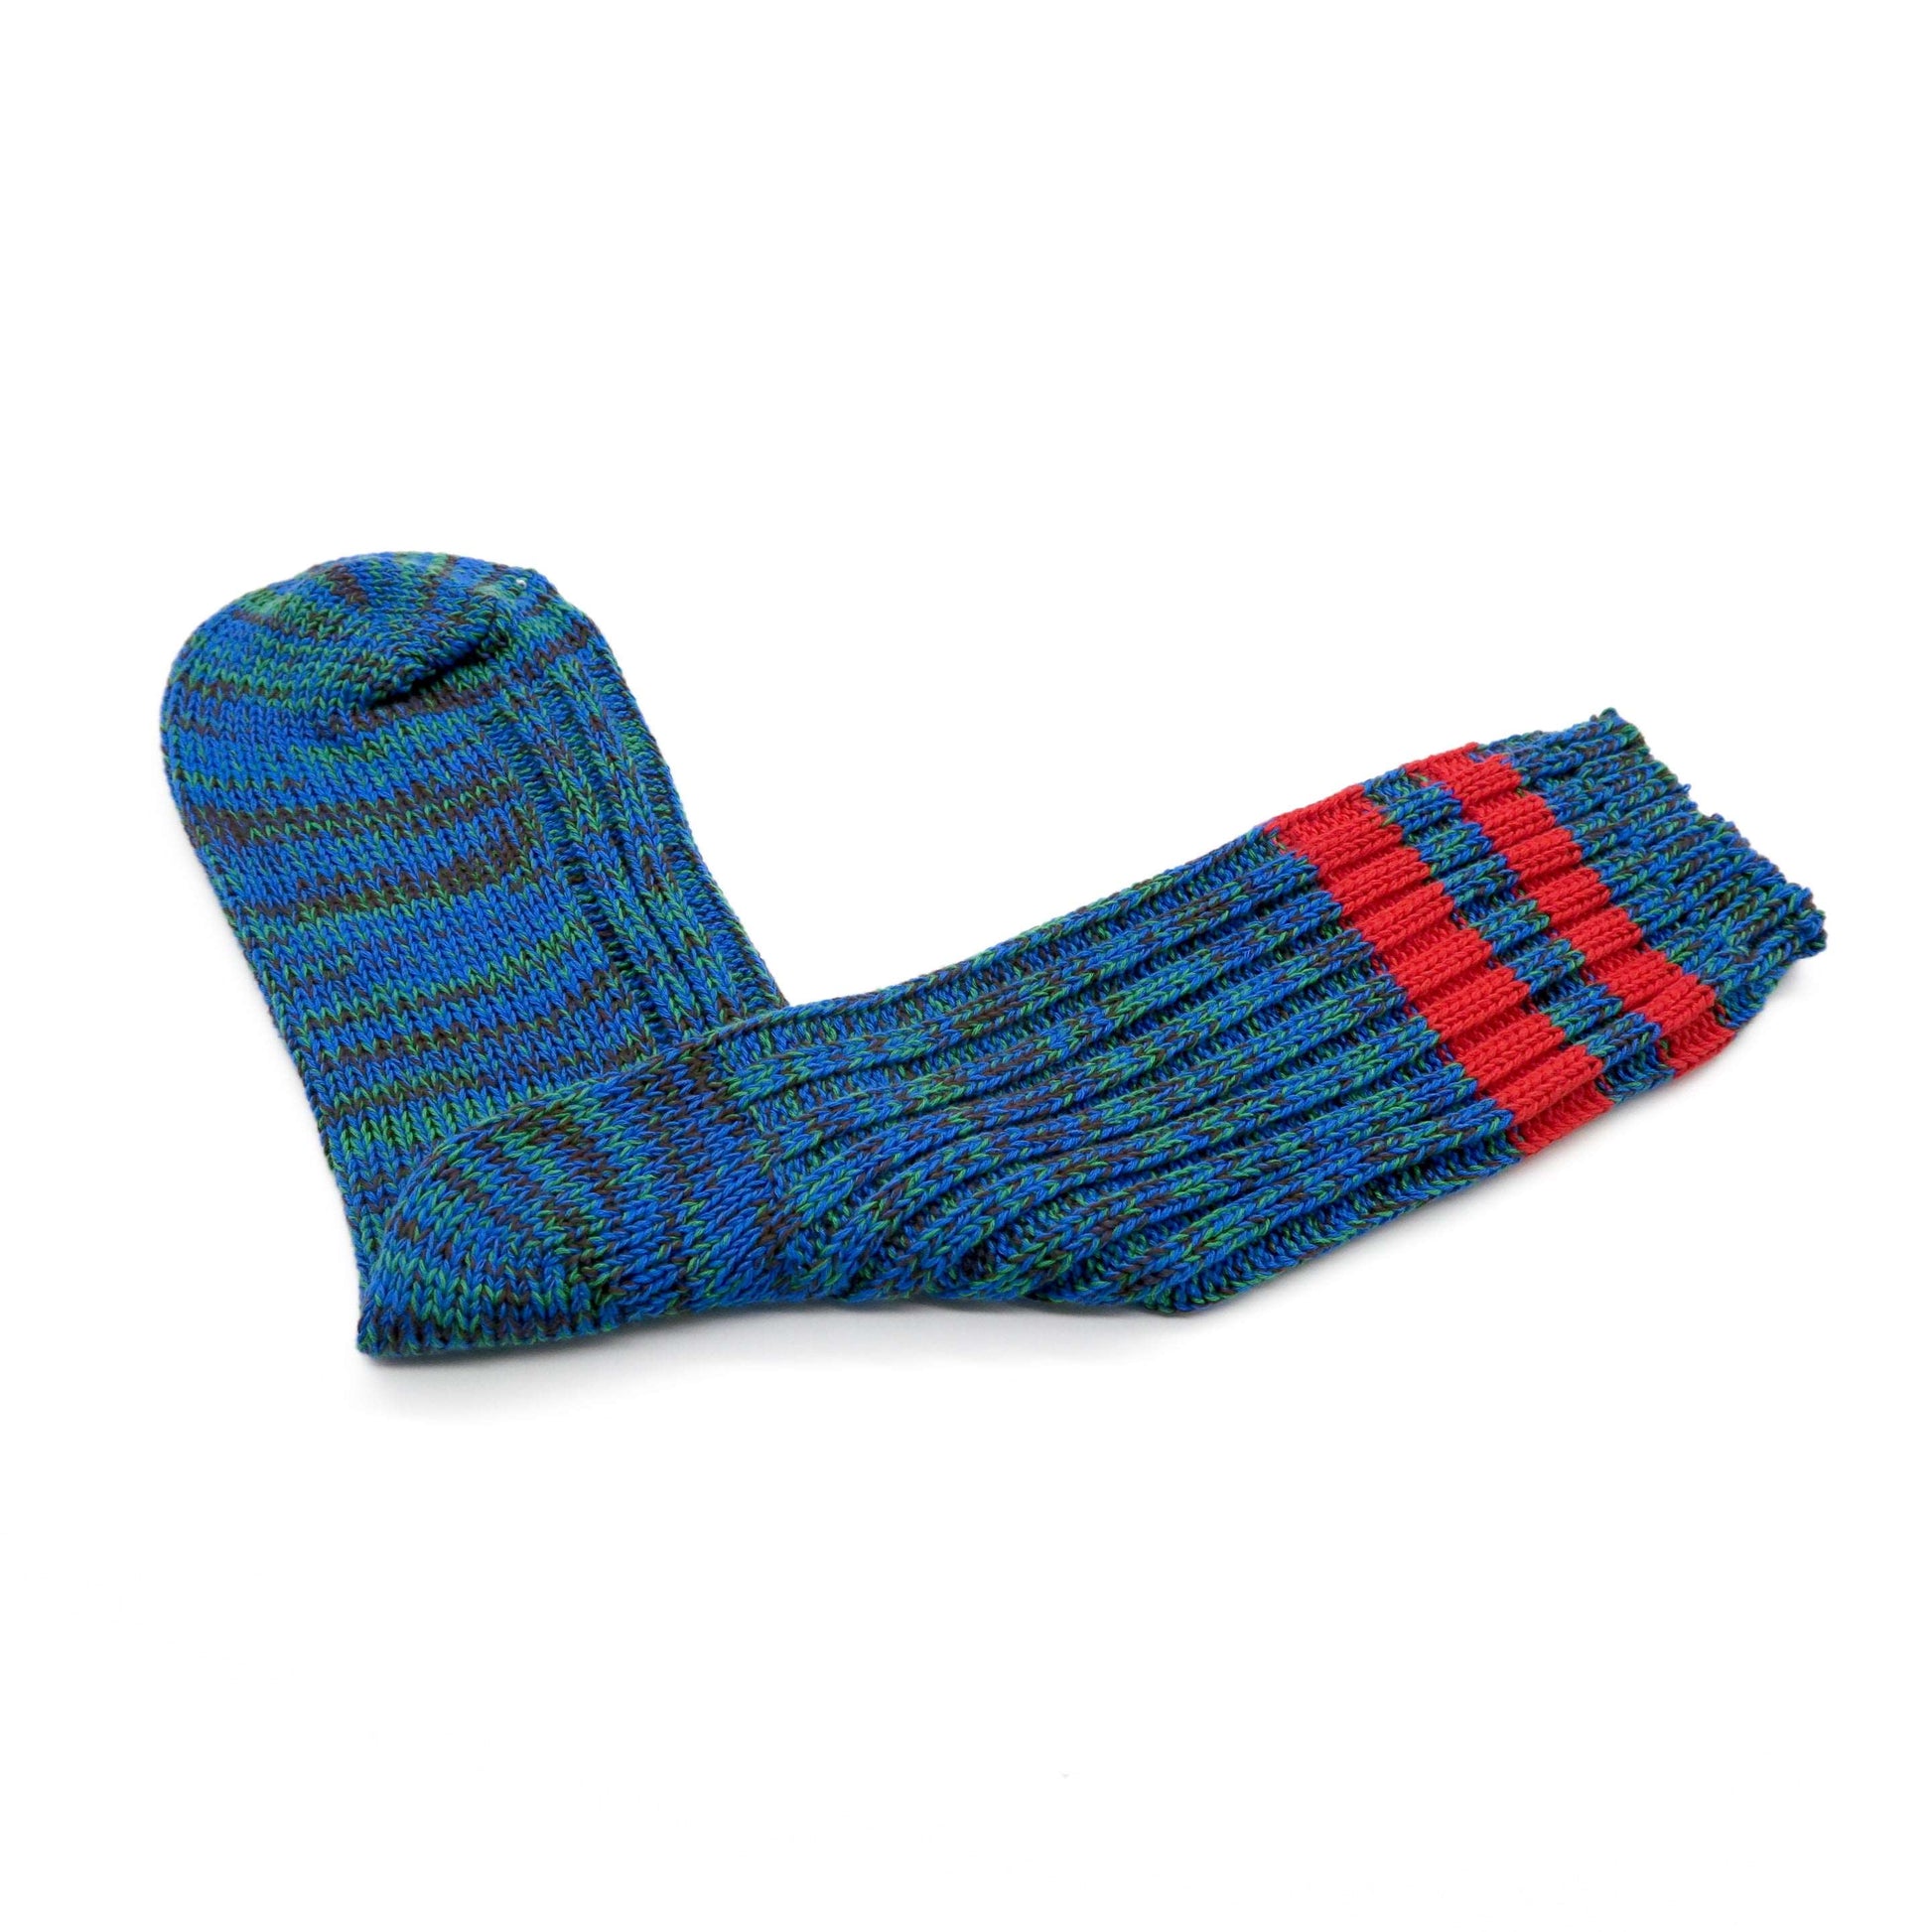 thick teal color knitted sock